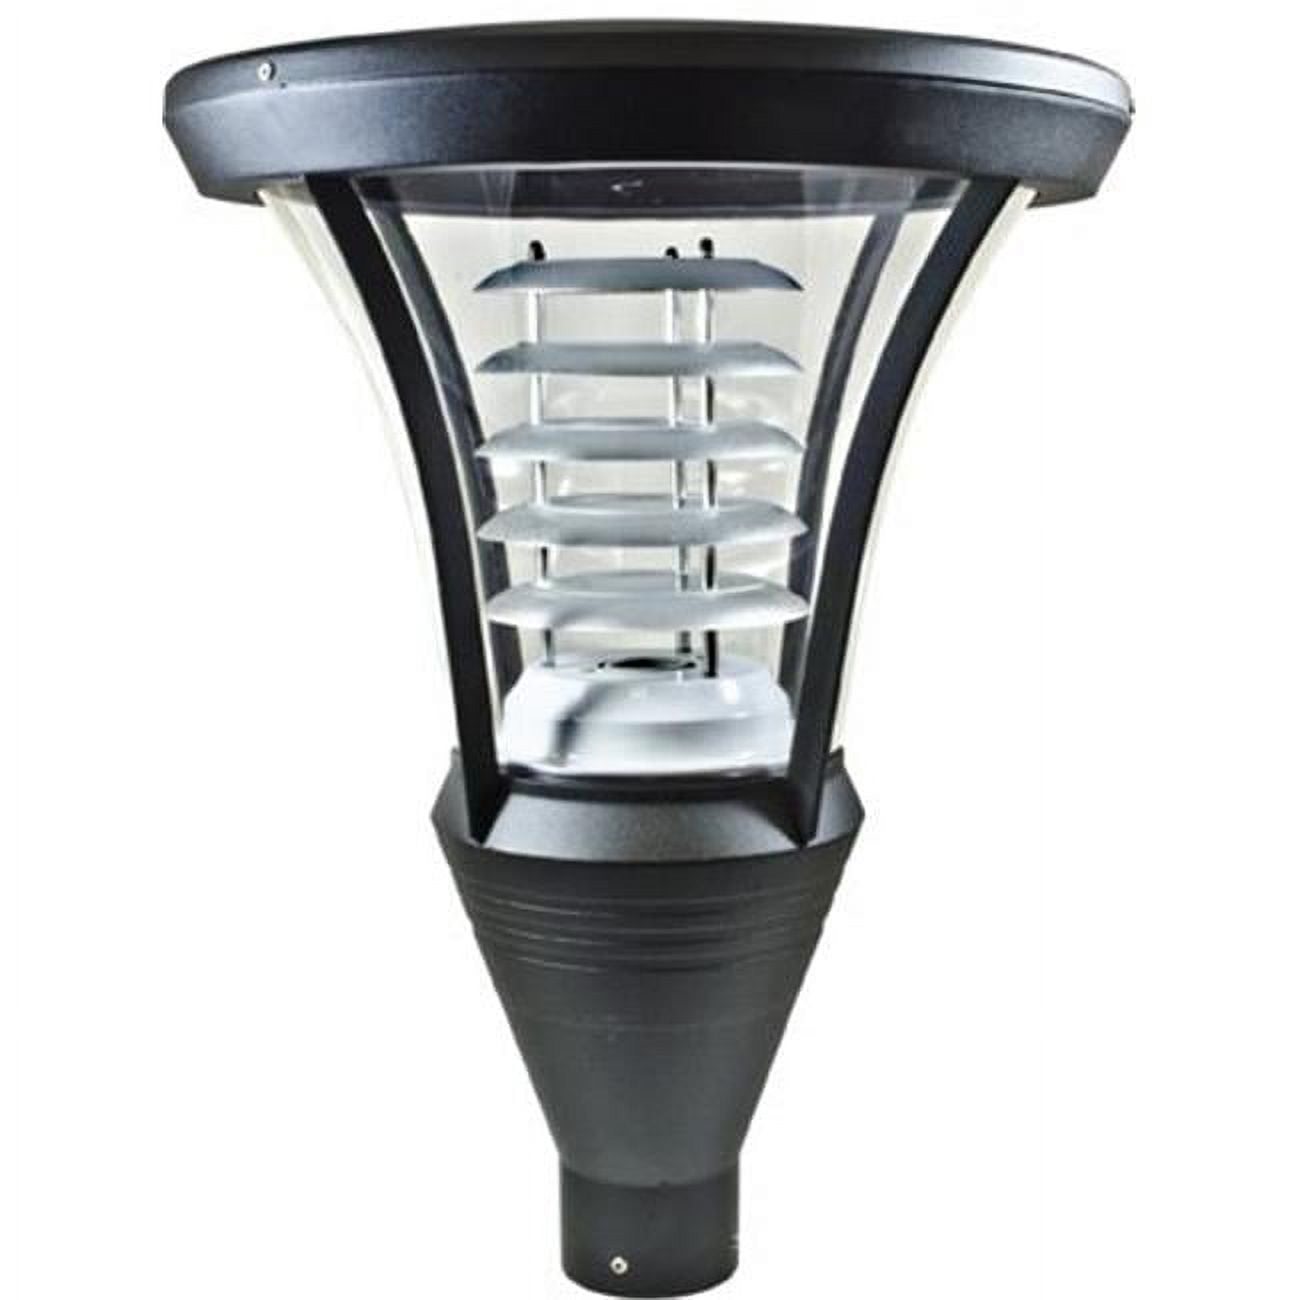 Picture of Dabmar Lighting GM644-B 35W 120V Powder Coated Cast Aluminum Post Top Light Fixture with Metal Halide Lamp, Black - 22.75 x 17.25 x 17.25 in.